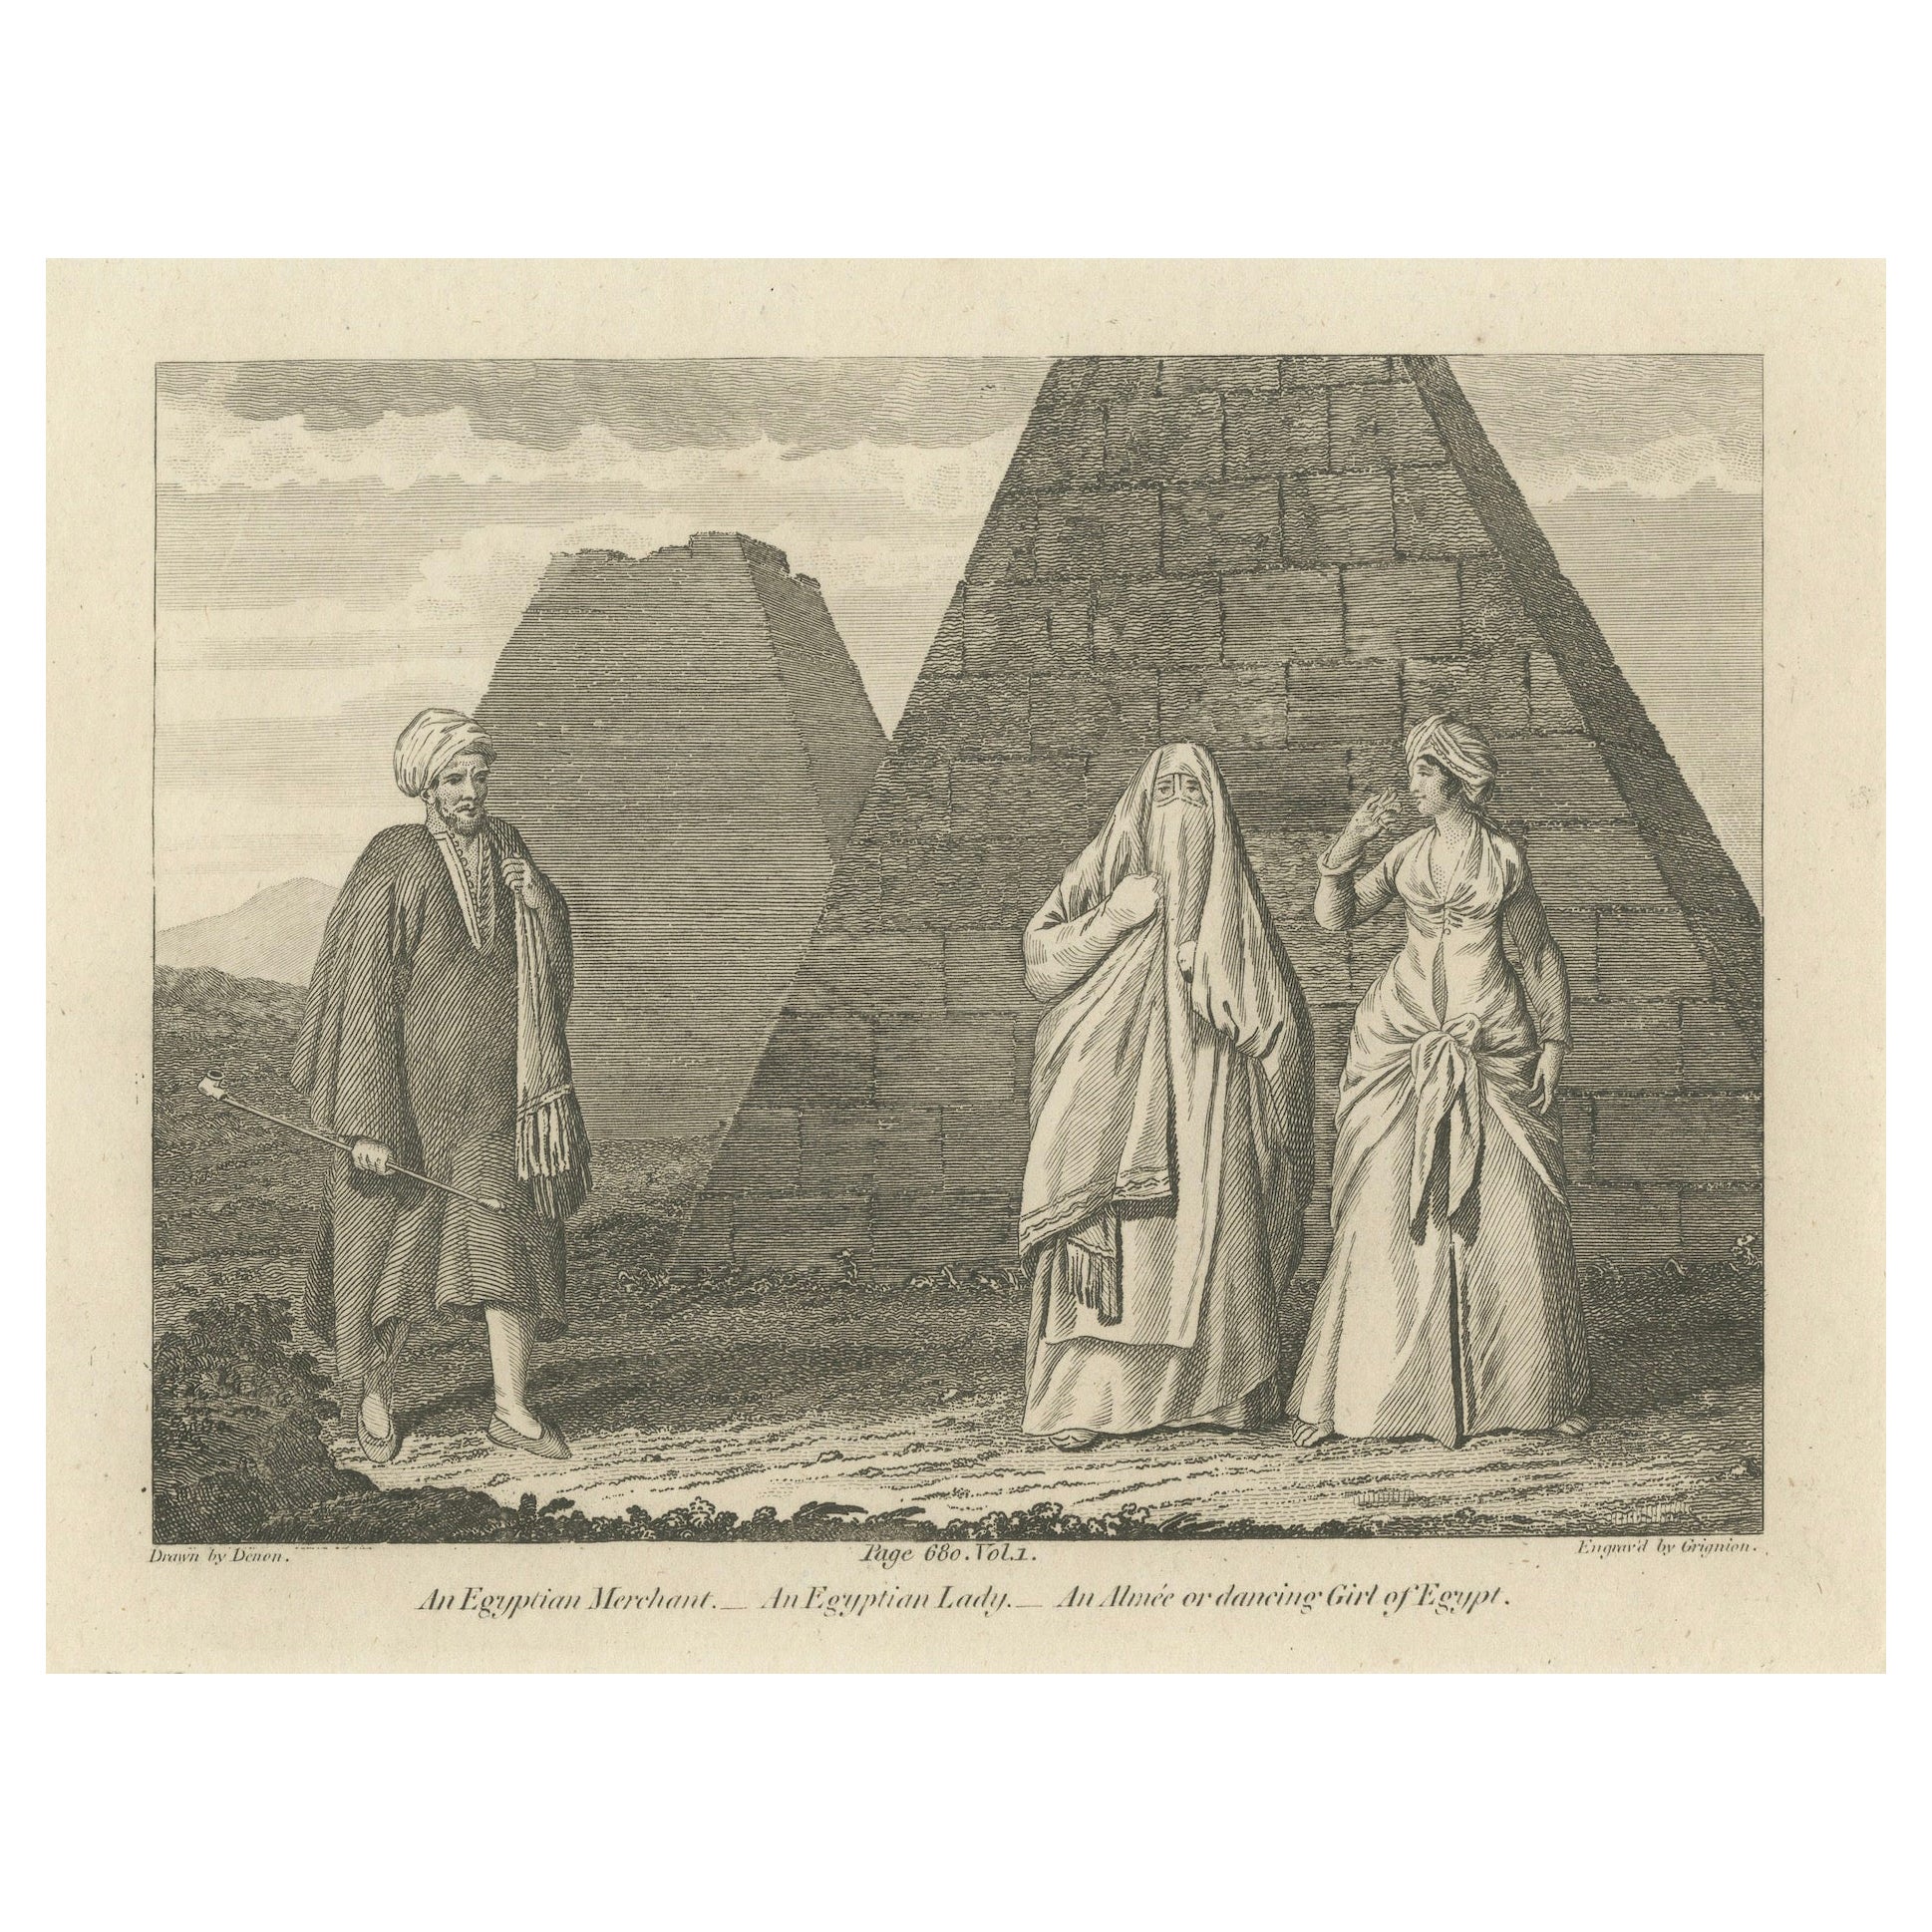 Society of the Nile: Mamluk, Lady, and Almee in Egypt, 1801